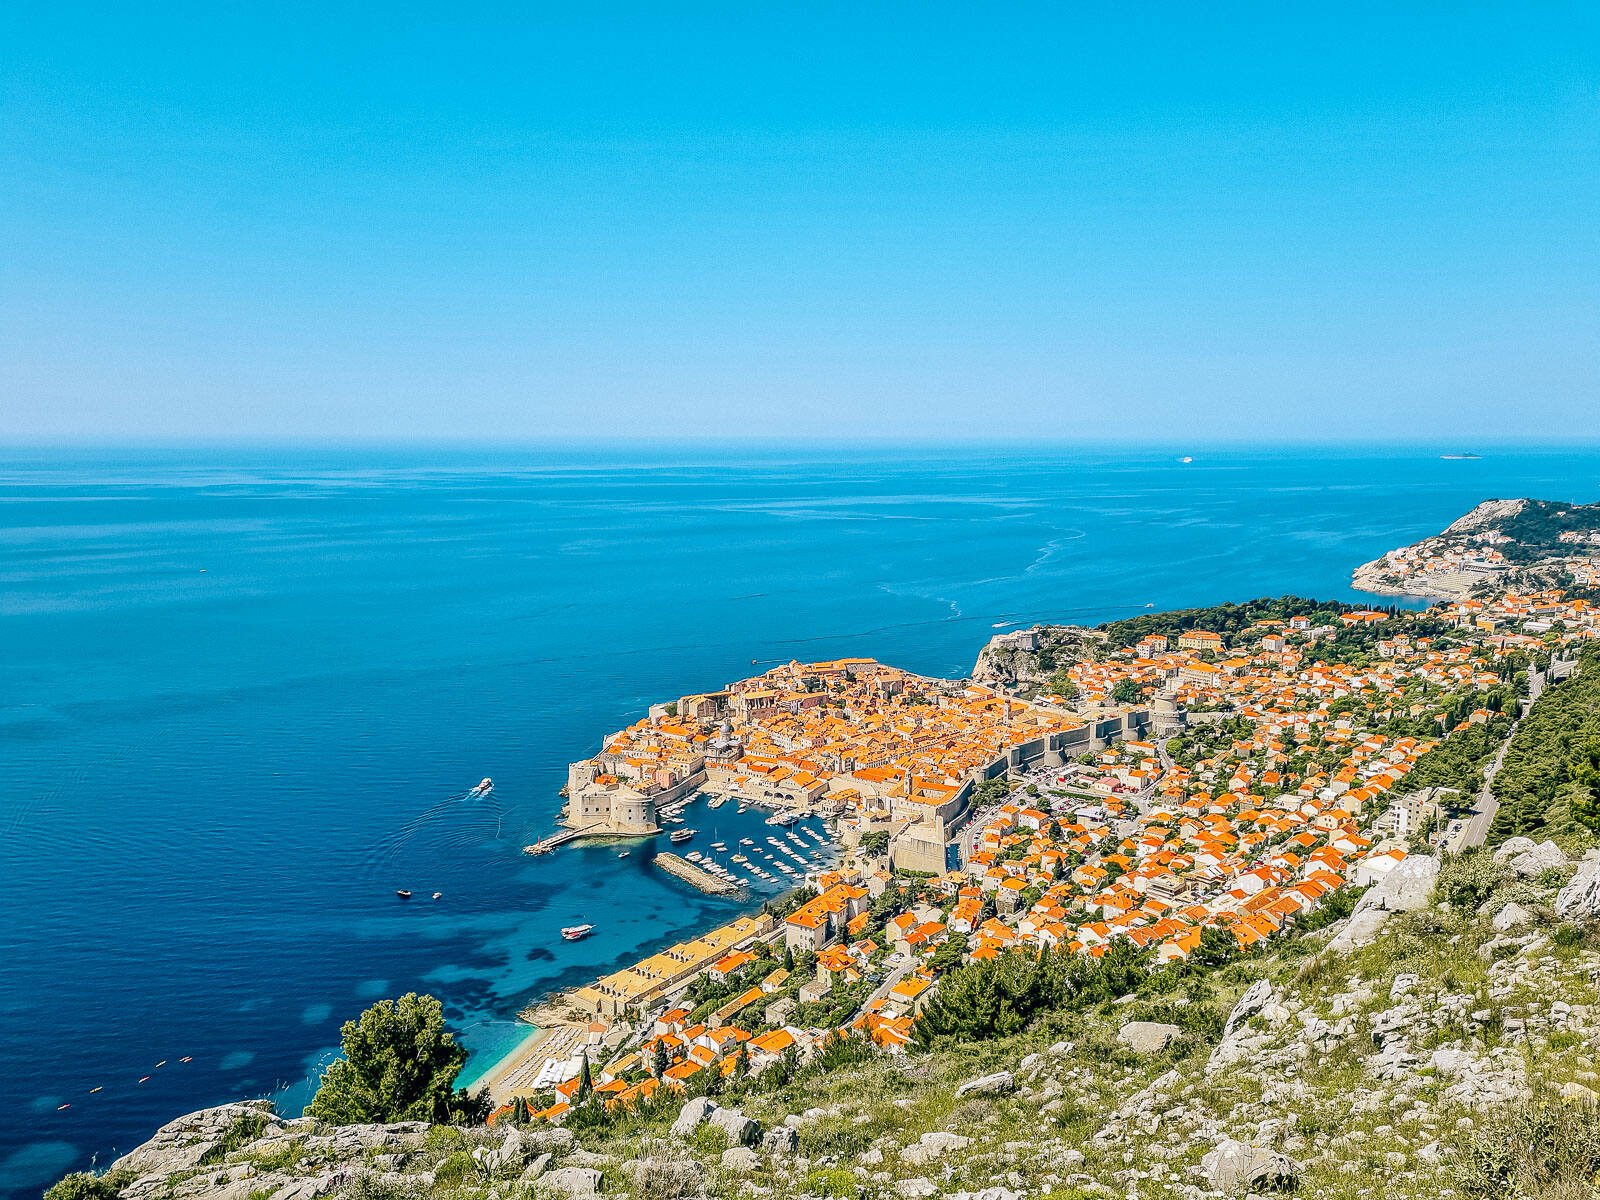 views from the top of mount Srd of the city of Dubrovnik below, surrounded by blue sea